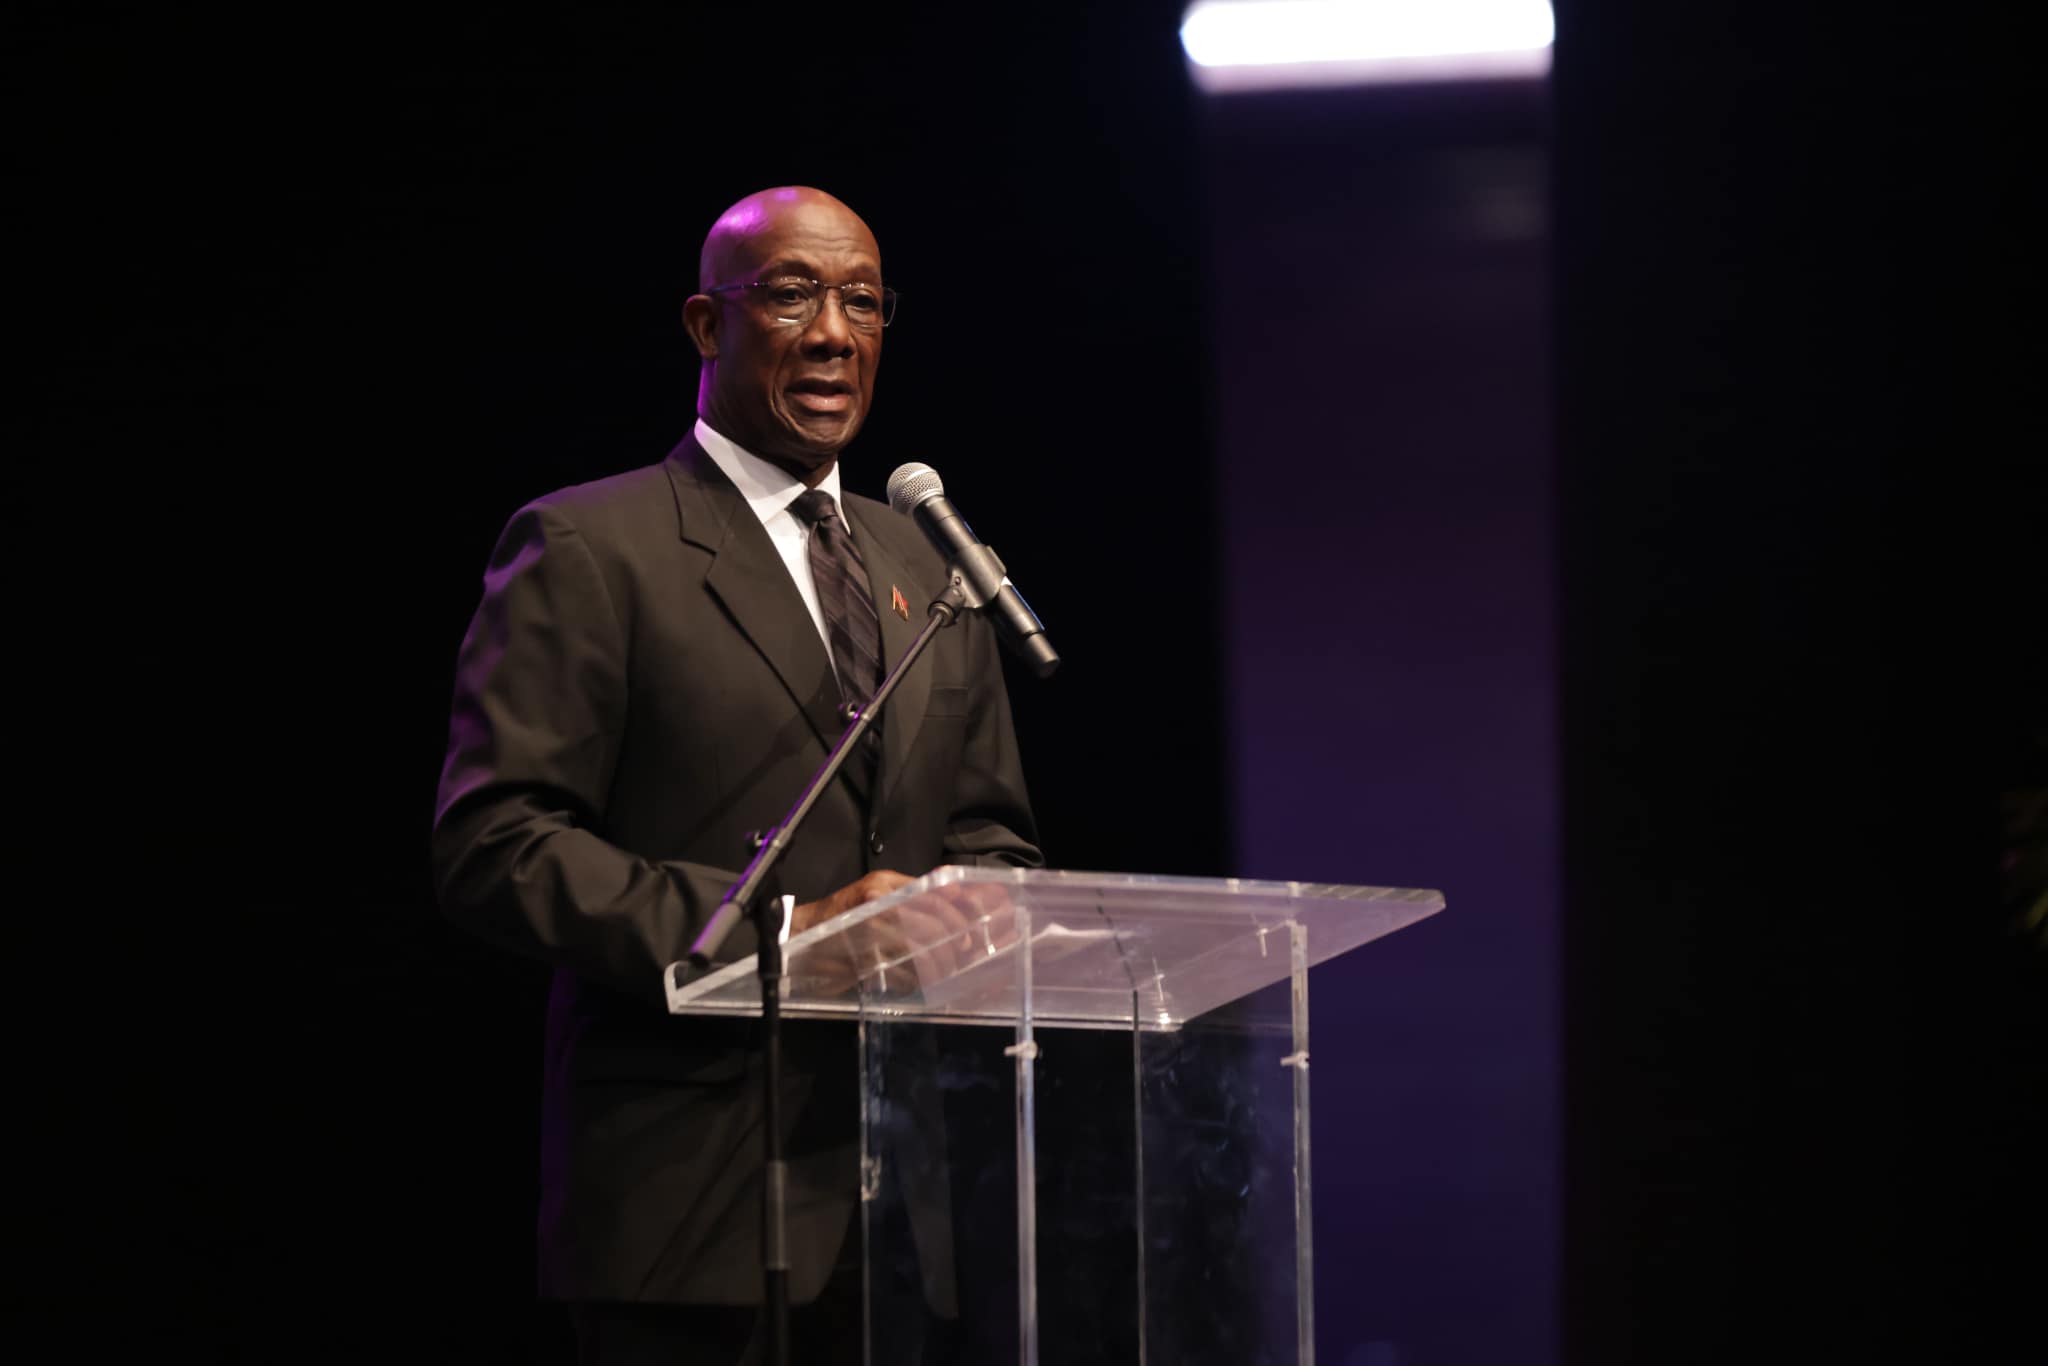 PM Rowley’s Easter message: “Recognize the limitations of our humanity and undertake our personal spiritual journey.”